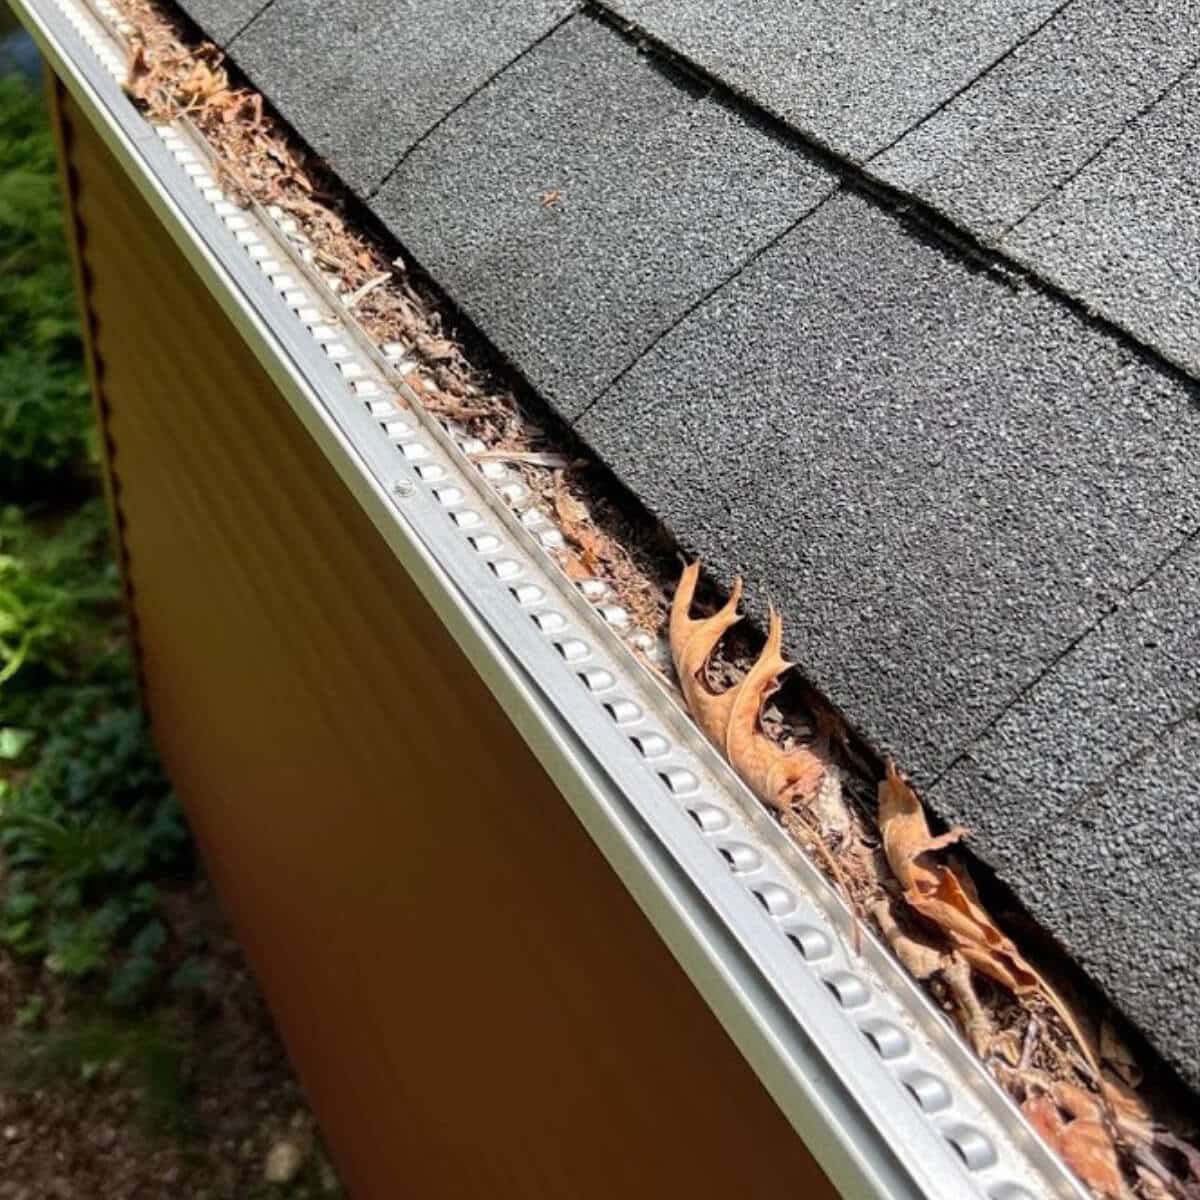 clogged gutter needing expert gutter cleaning service in allentown pa